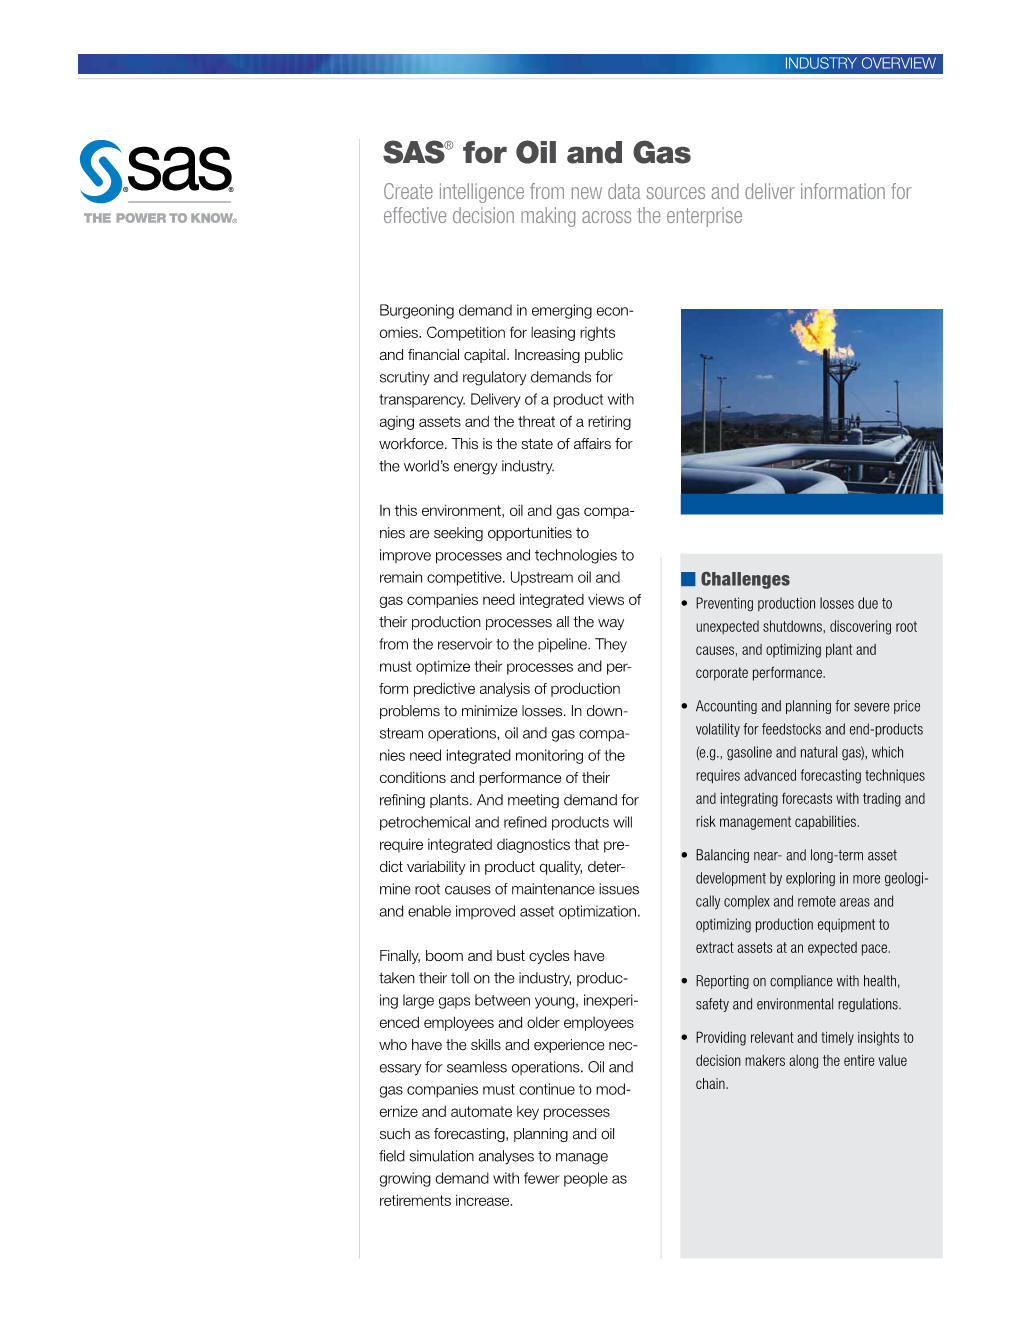 SAS® for Oil and Gas Create Intelligence from New Data Sources and Deliver Information for Effective Decision Making Across the Enterprise